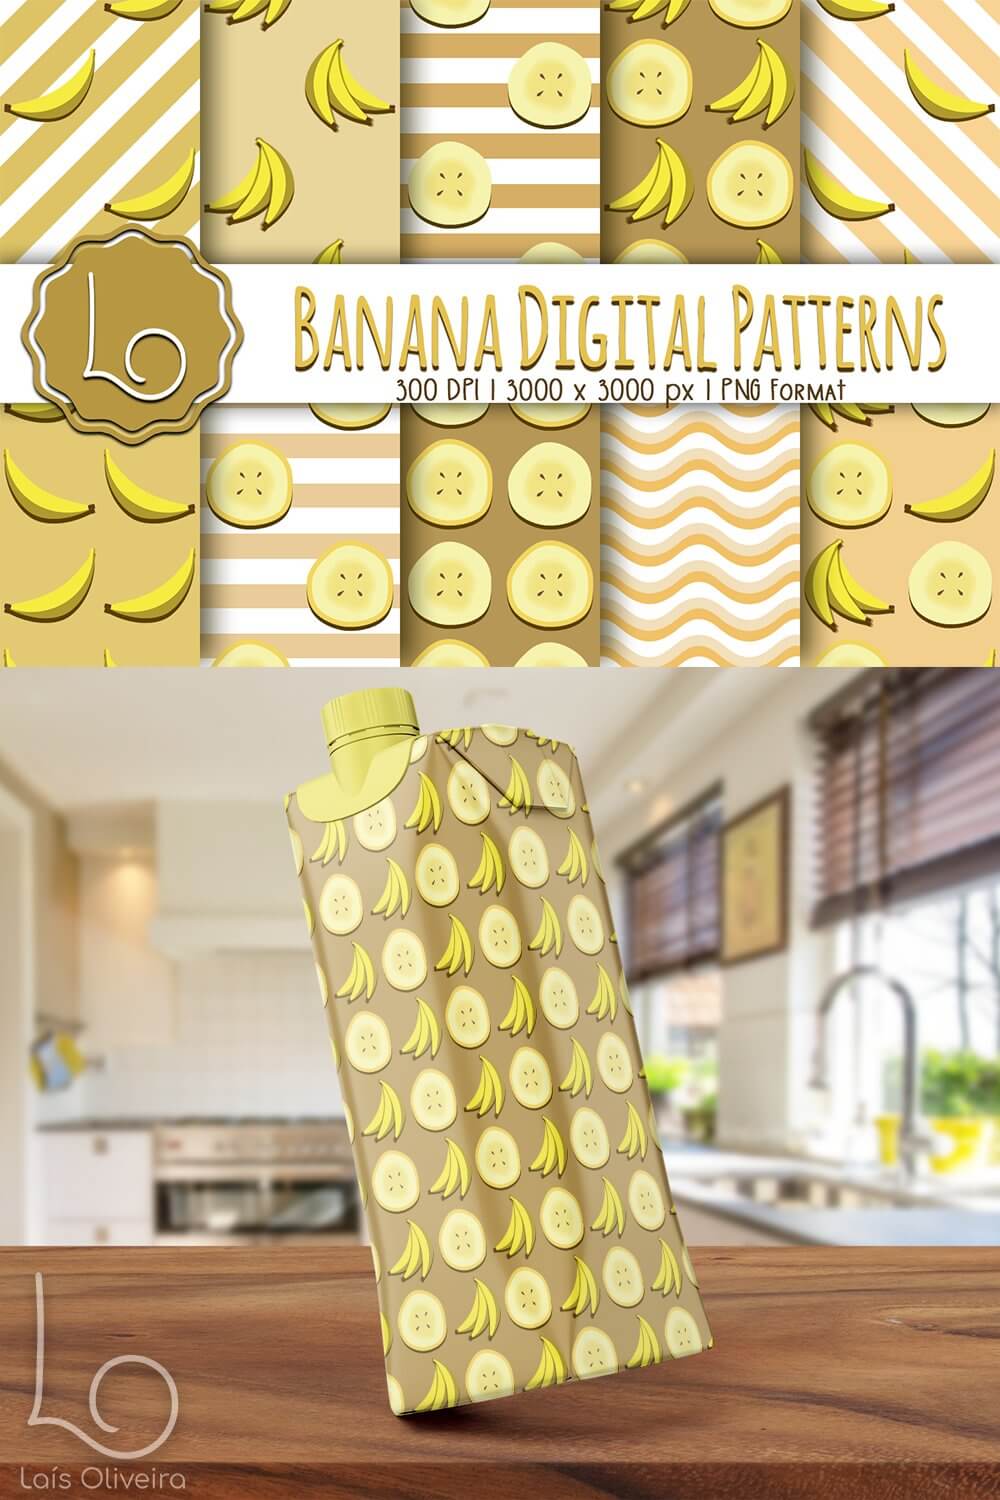 Variants of patterns with the image of bananas.